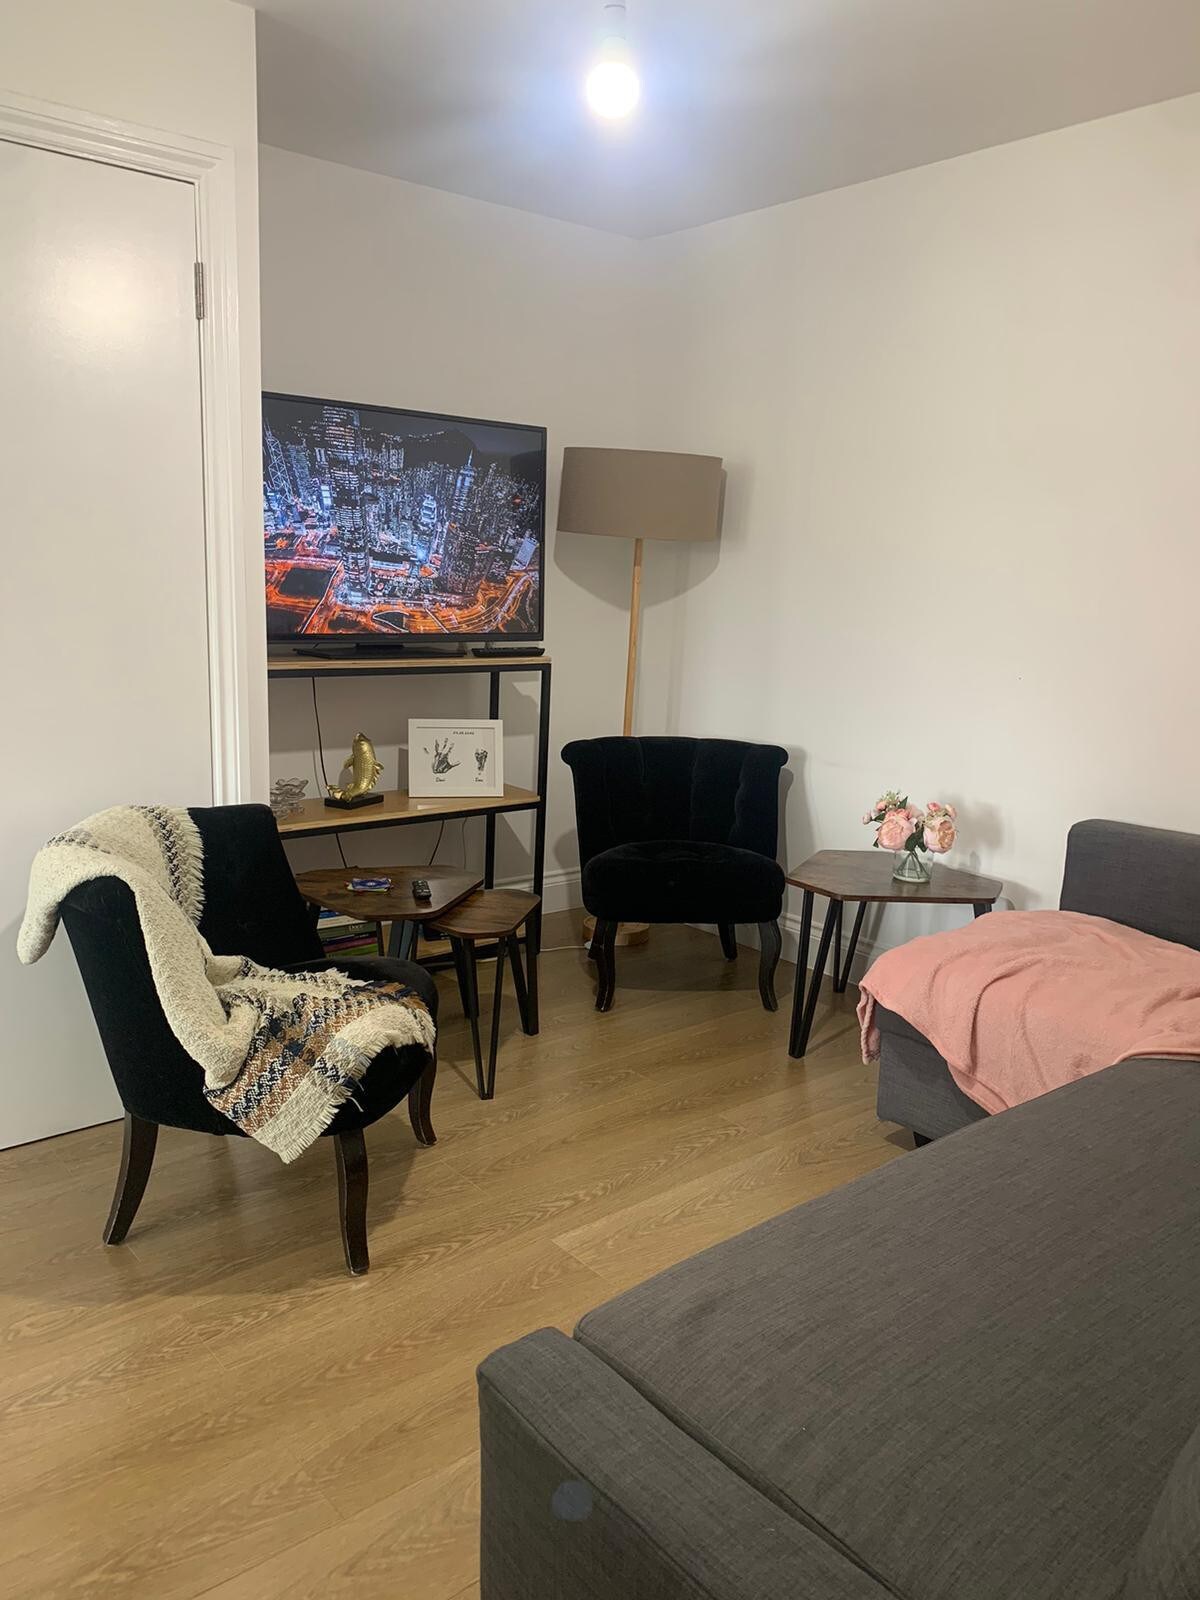 Homely 2bd flat - West London